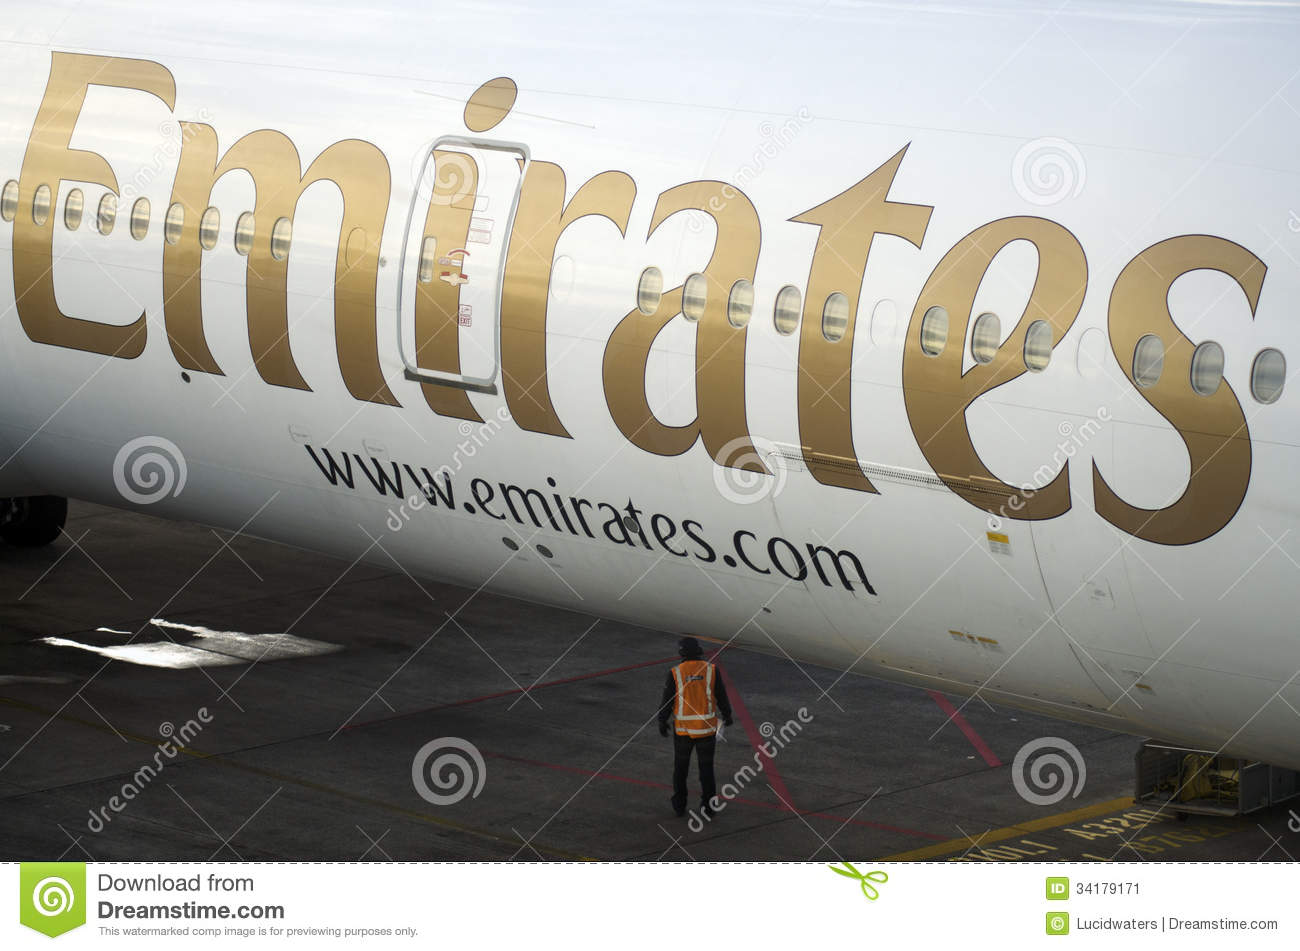     On Sep 15 2013 Emirates Airline Was Voted Airline Of The Year In 2013